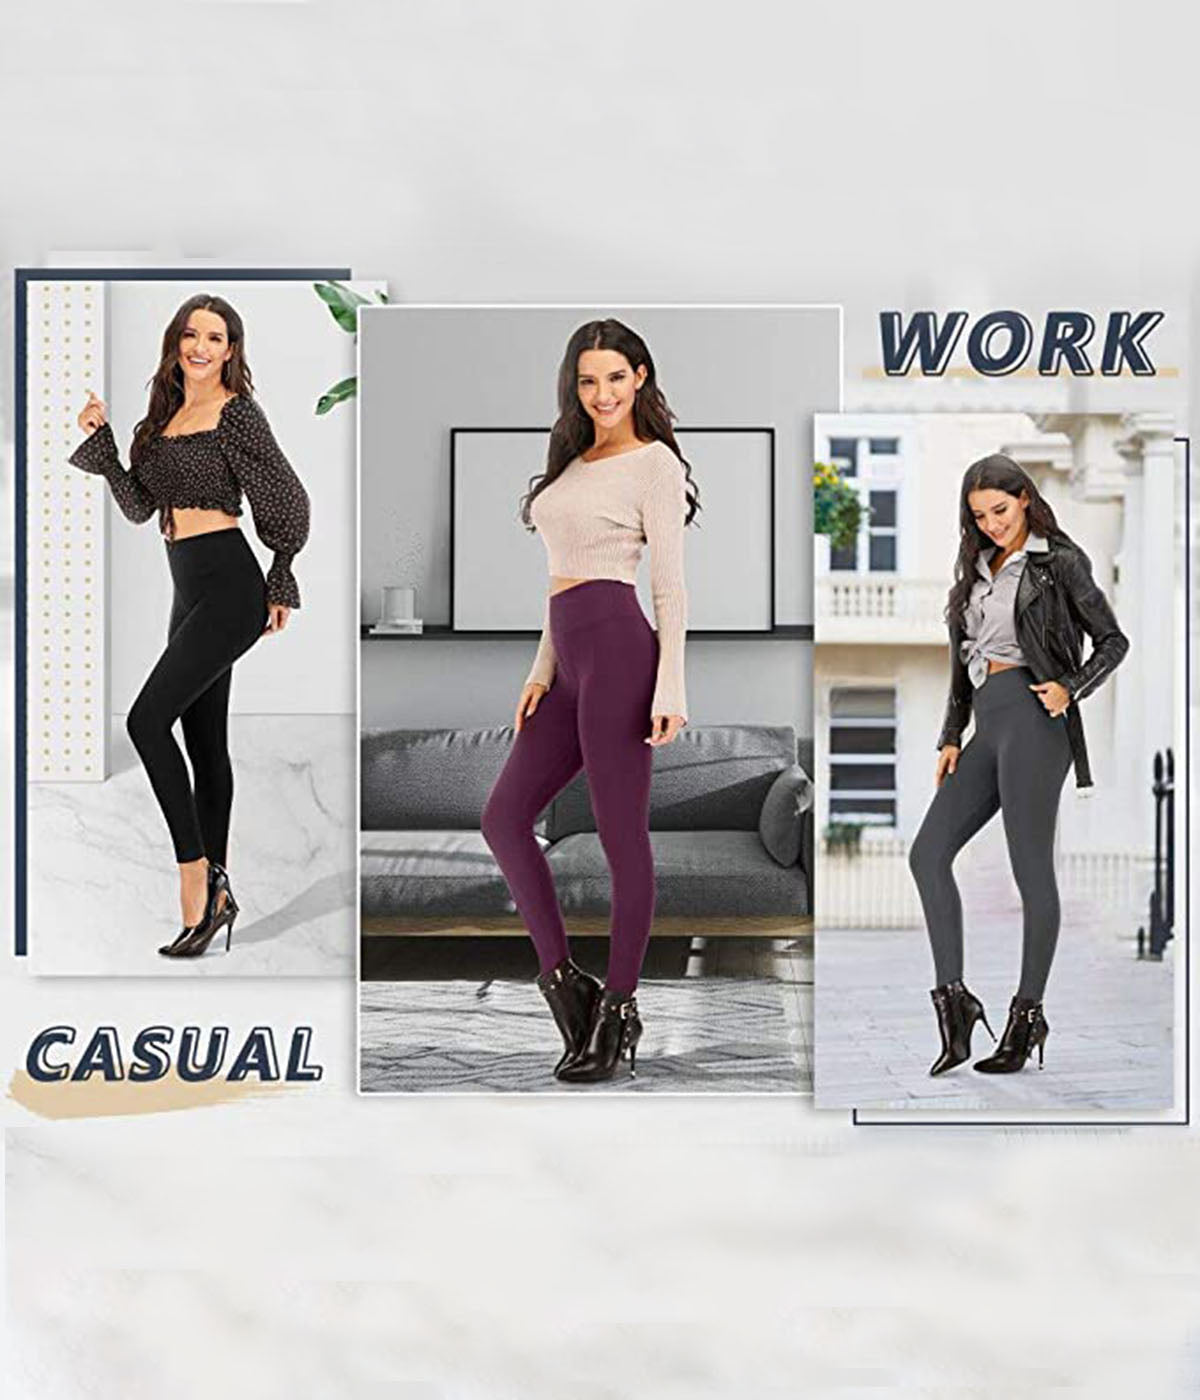 Buy Heathyoga High Waist Yoga Pants with Pockets for Women, Tummy Control  Yoga Leggings with Pockets Workout Athletic Pants (Wine, XX-Large) at